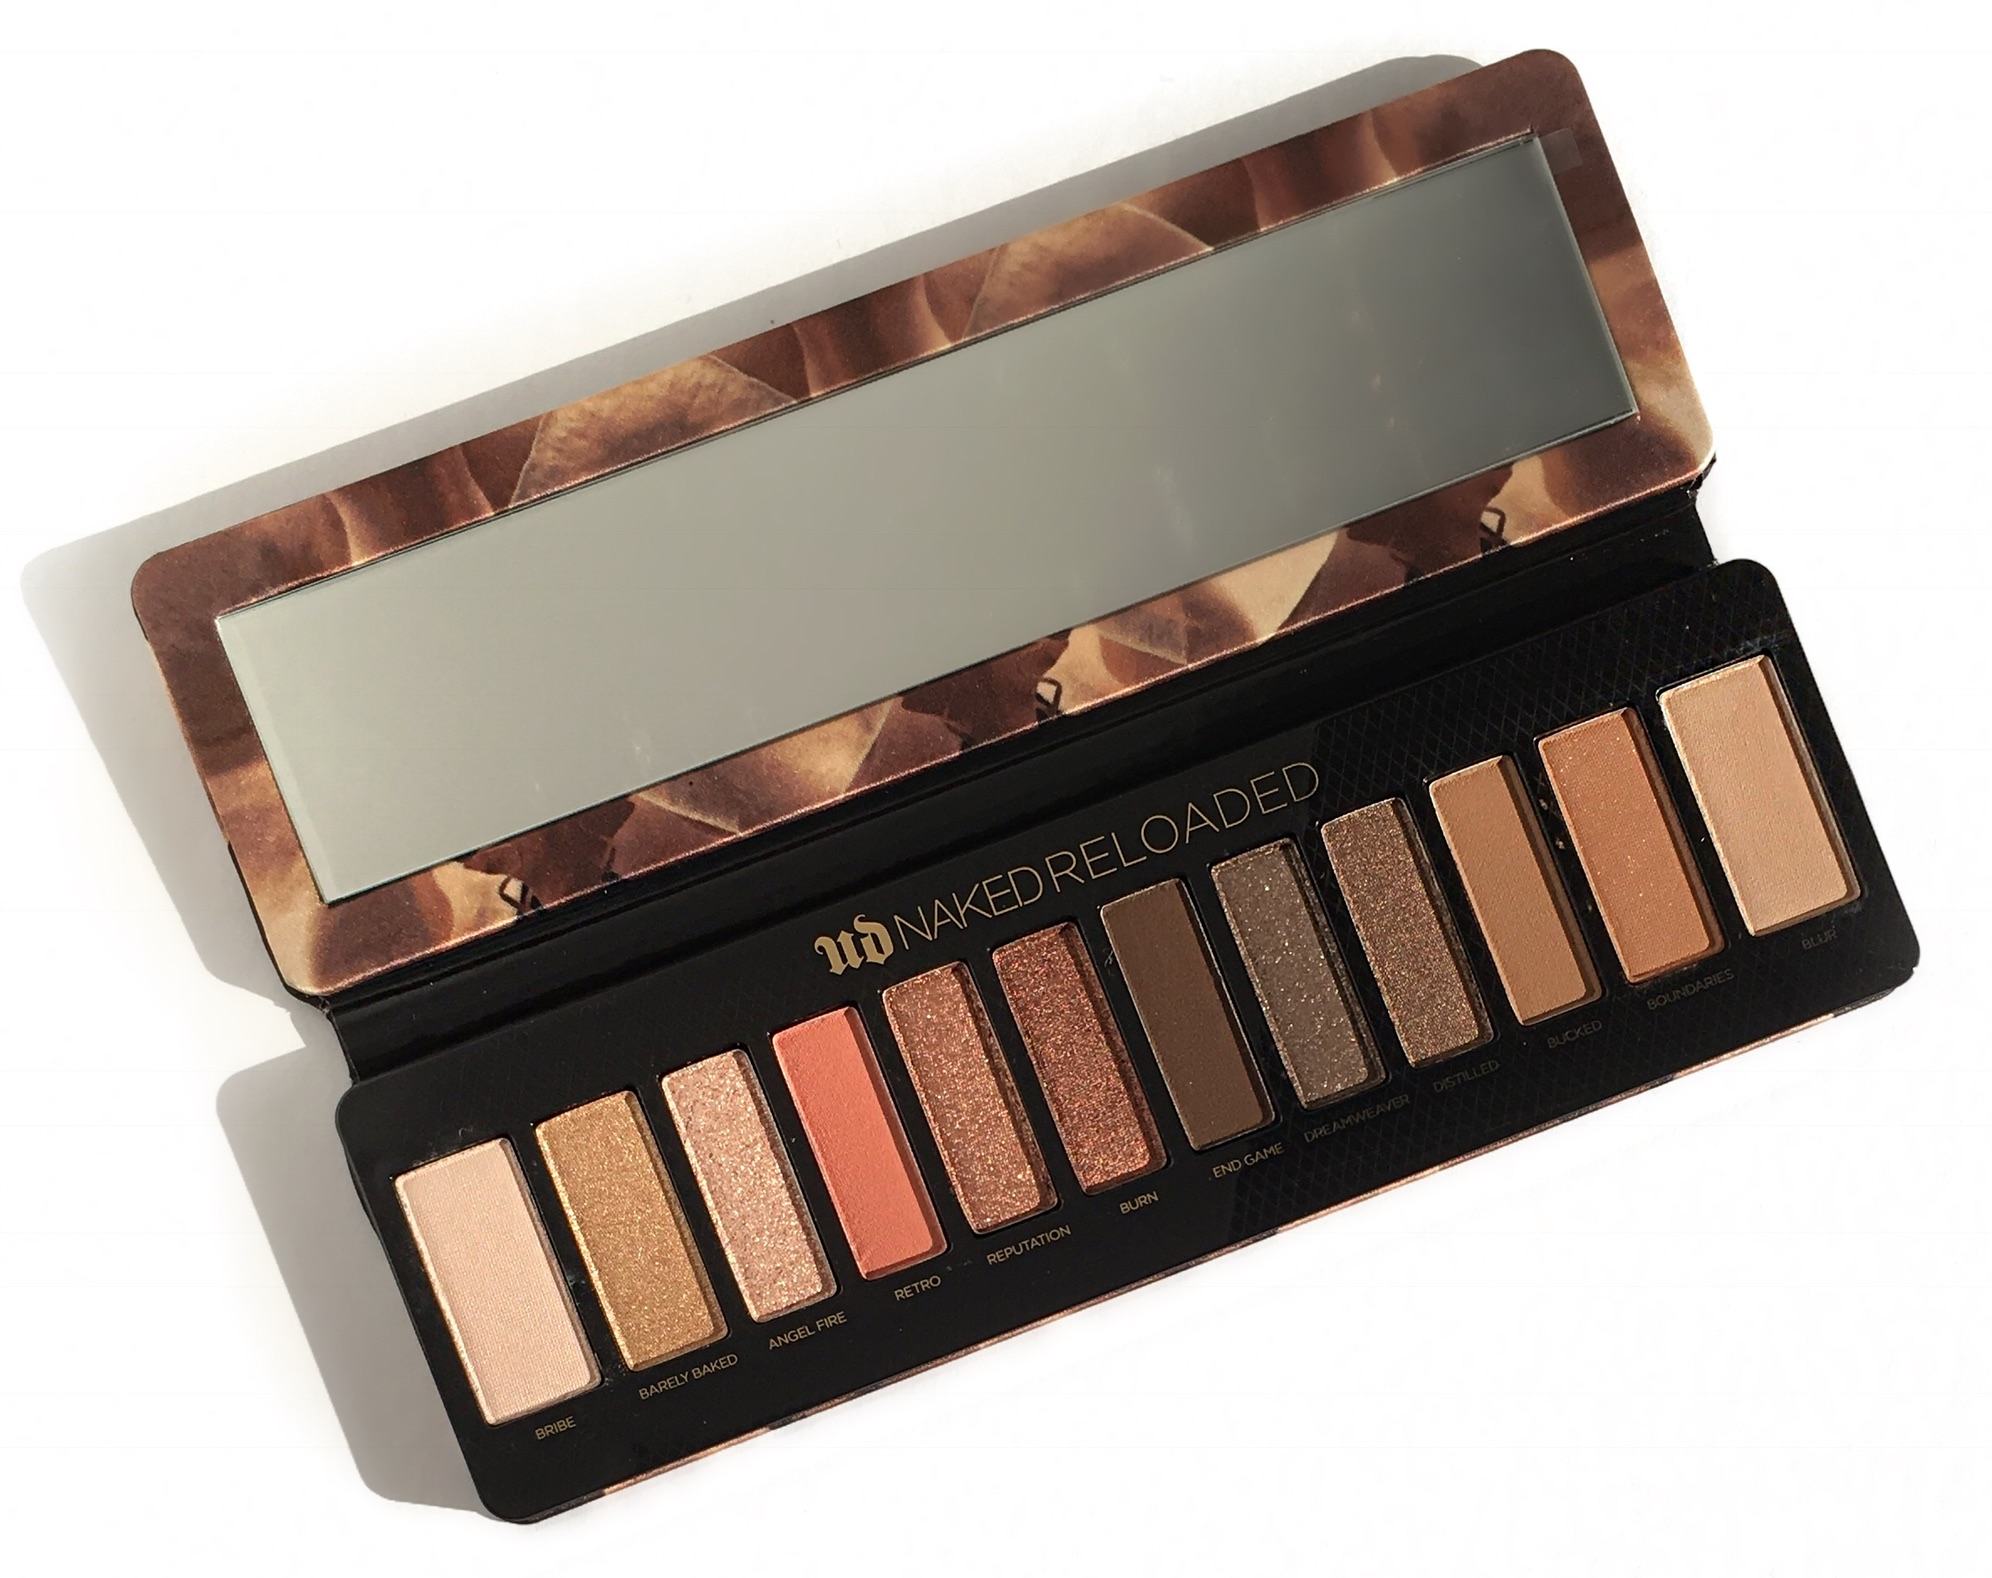 Urban Decay: Naked Reloaded Eyeshadow Palette | Makeup FOMO